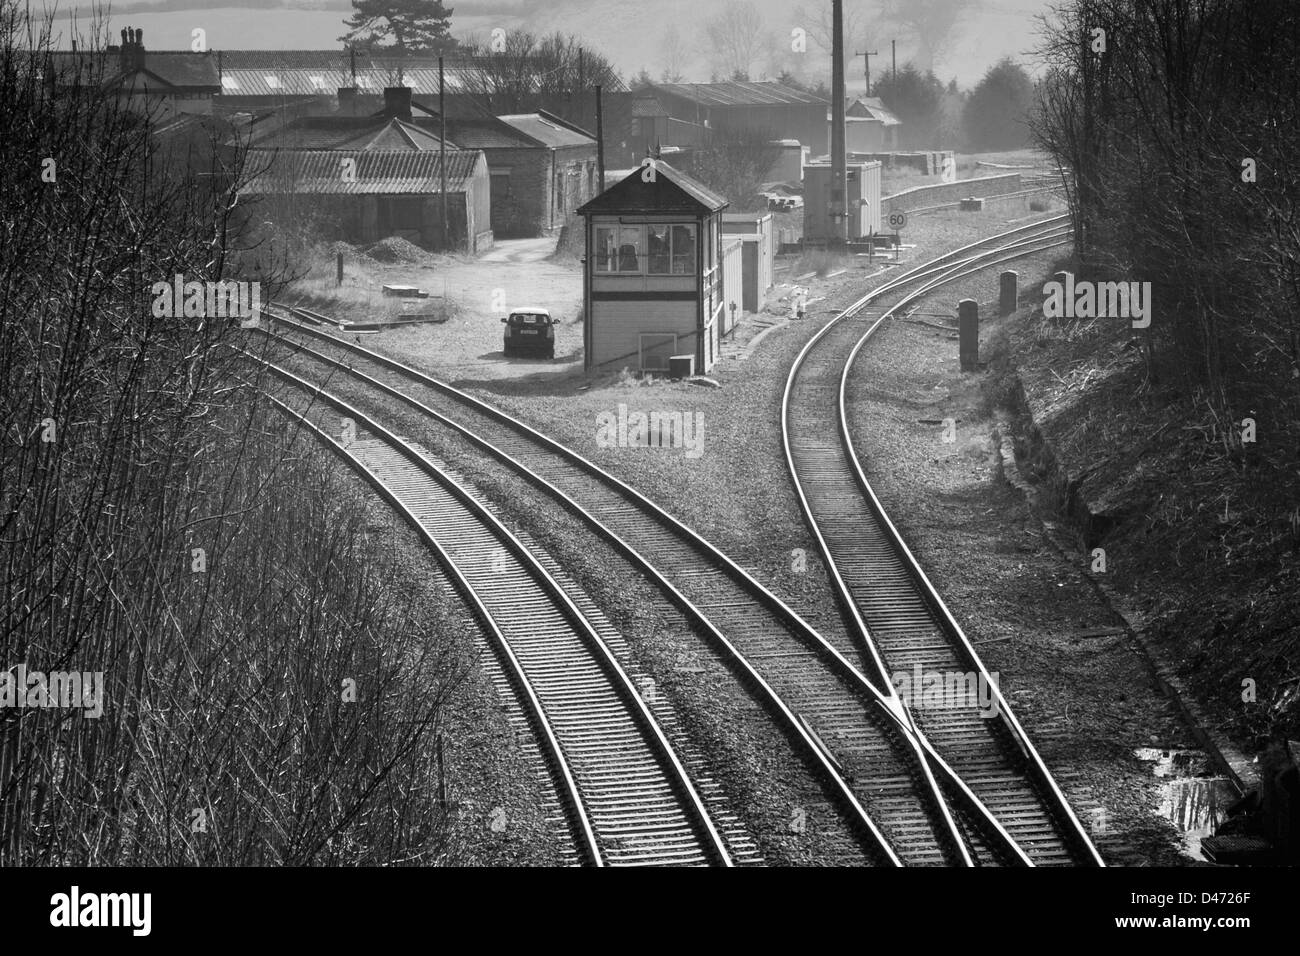 Manton Railway Junction at the site of the now defunct Manton Station in the county of Rutland, England, UK Stock Photo